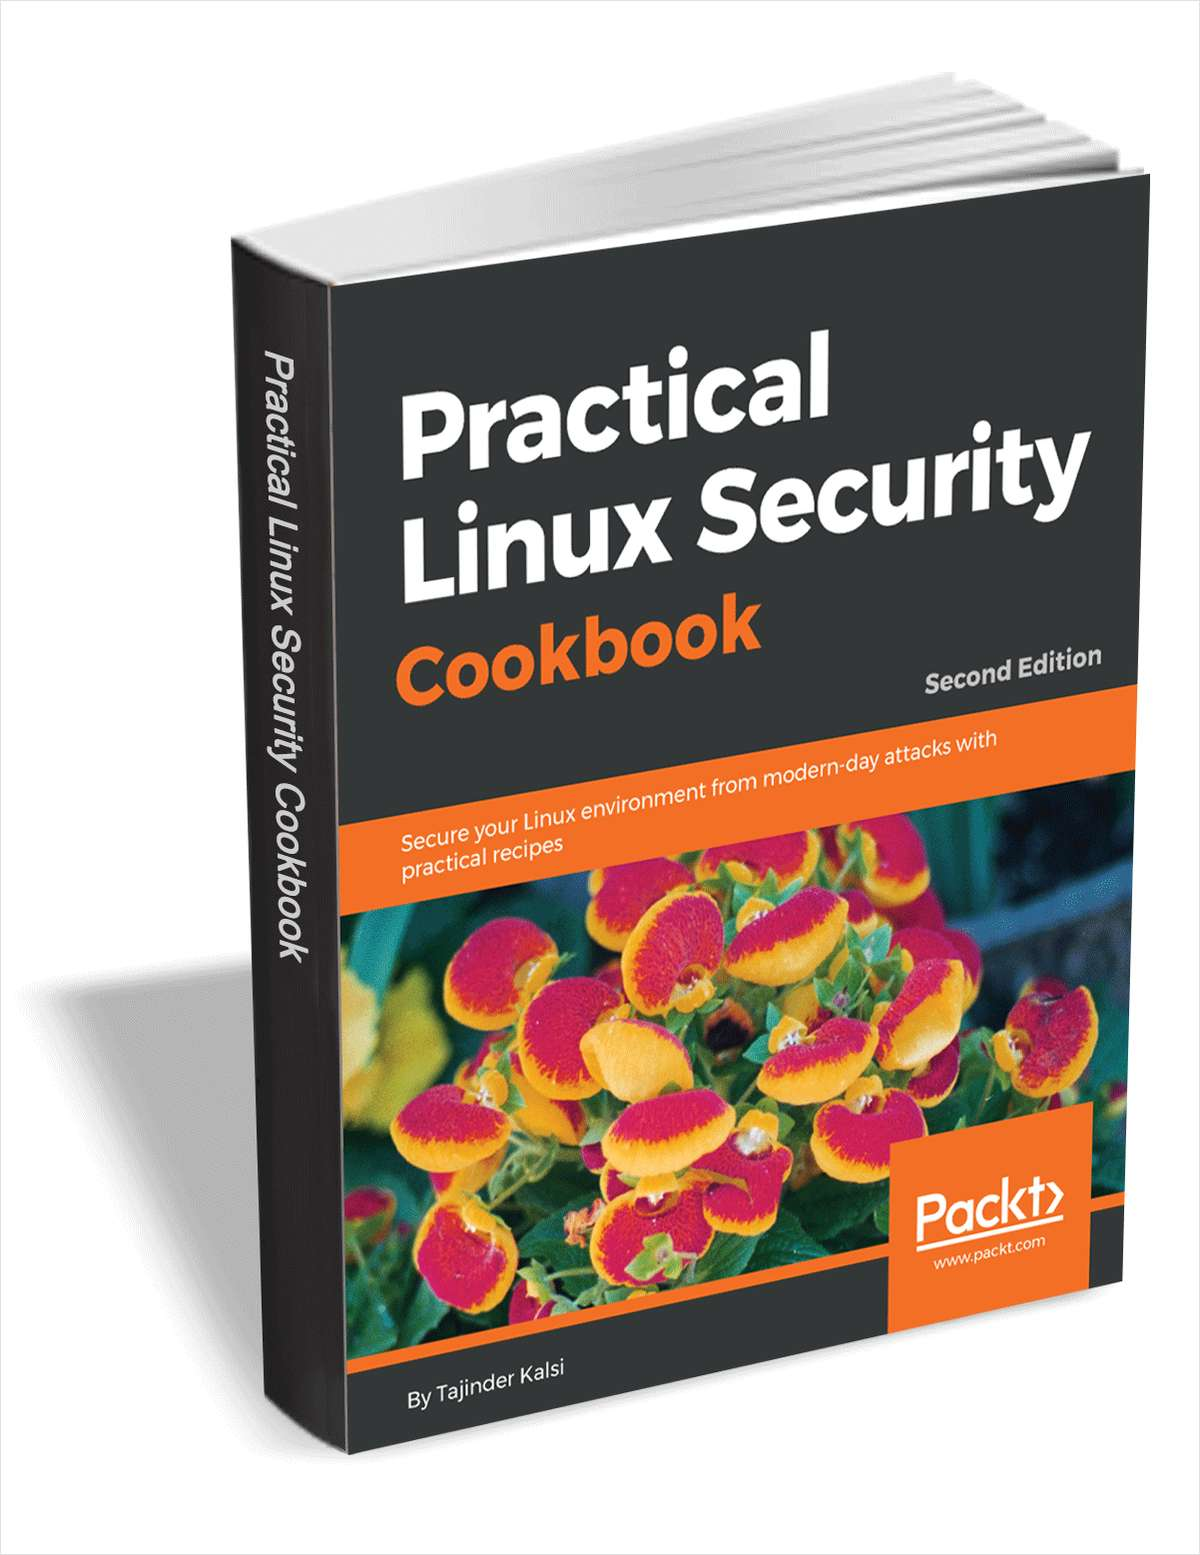 Practical Linux Security Cookbook - Second Edition ($35.99 Value) FREE for a Limited Time Screenshot